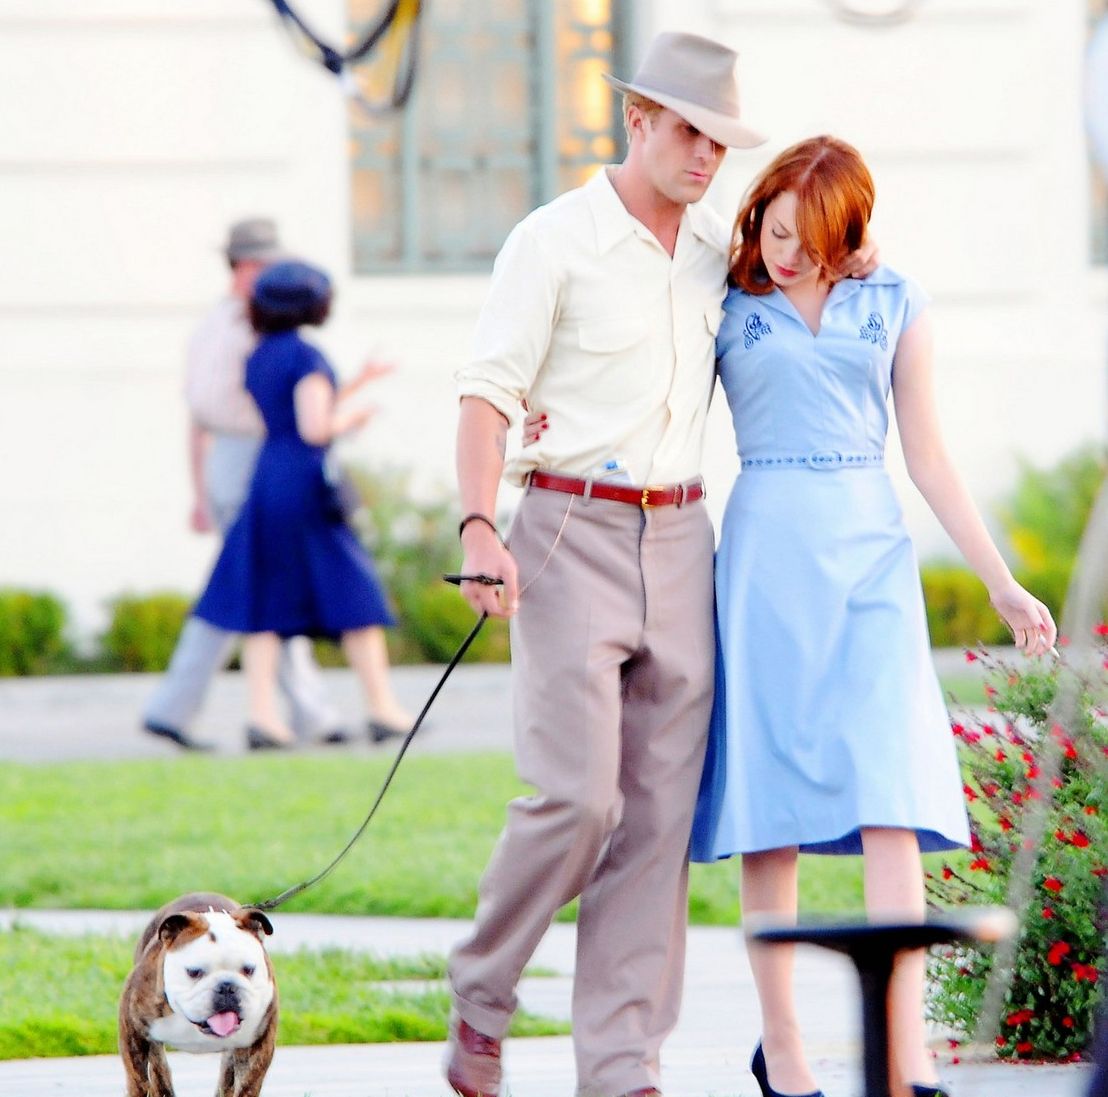 Ryan Gosling and Emma Stone on The Gangster Squad Set #4